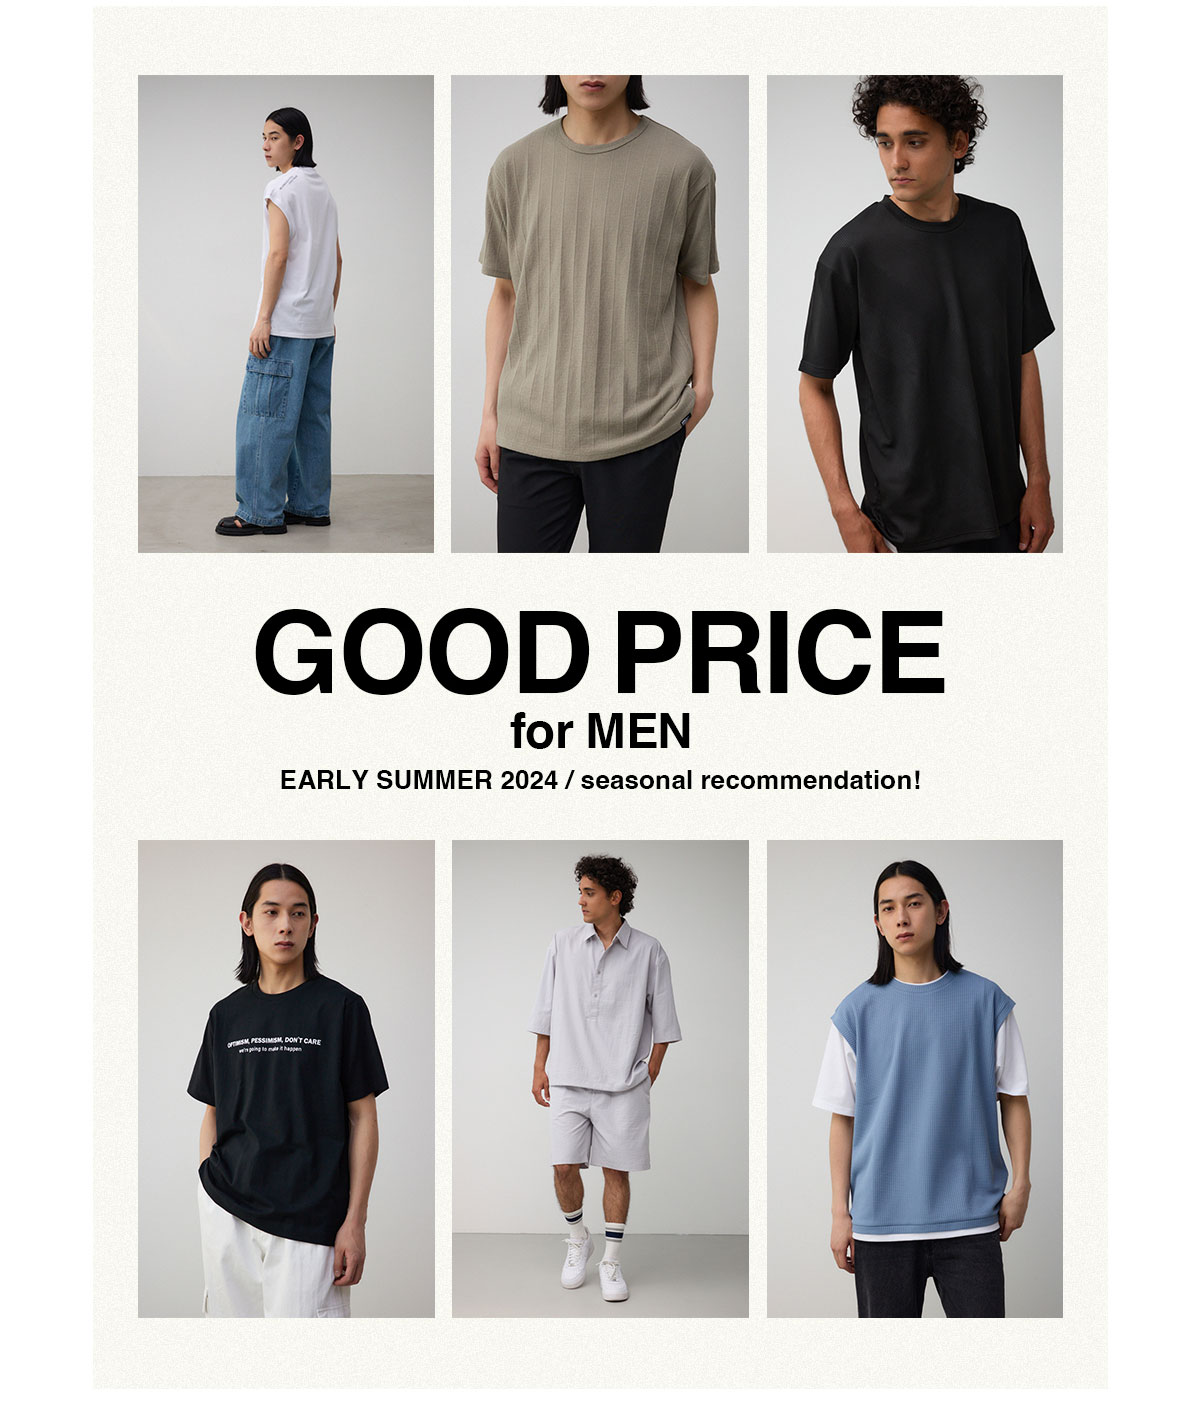 GOOD PRICE for MEN EARLY SUMMER 2024 / AZUL BY MOUSSY